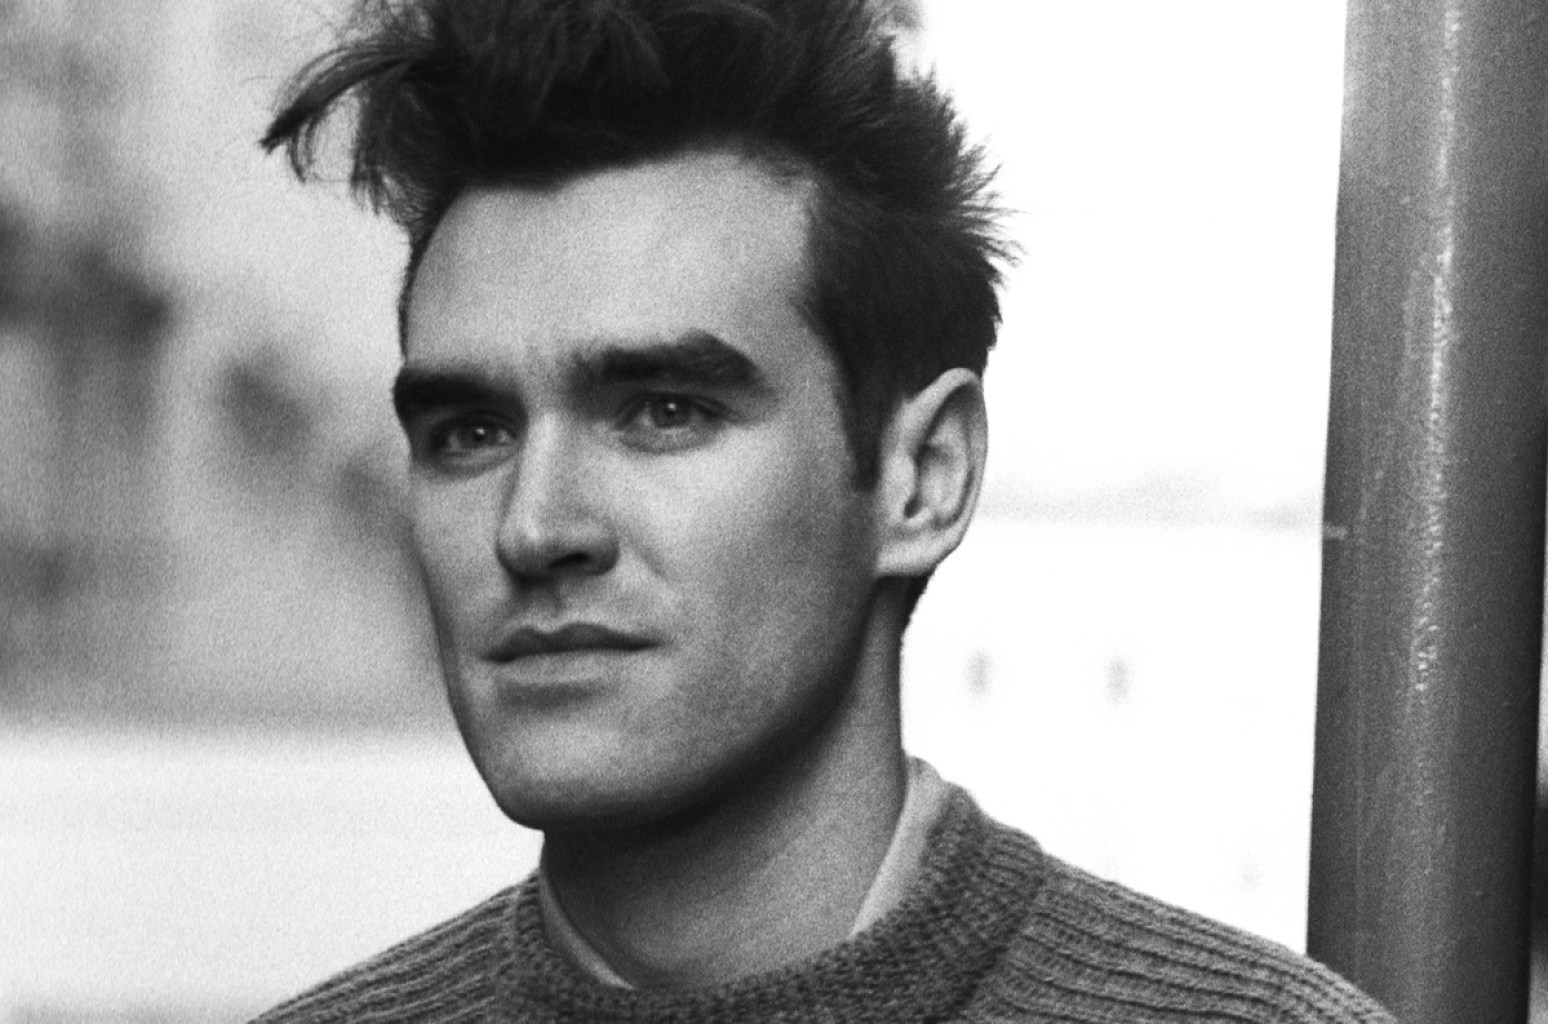 Classic black and white headshot of the singer Morrissey.